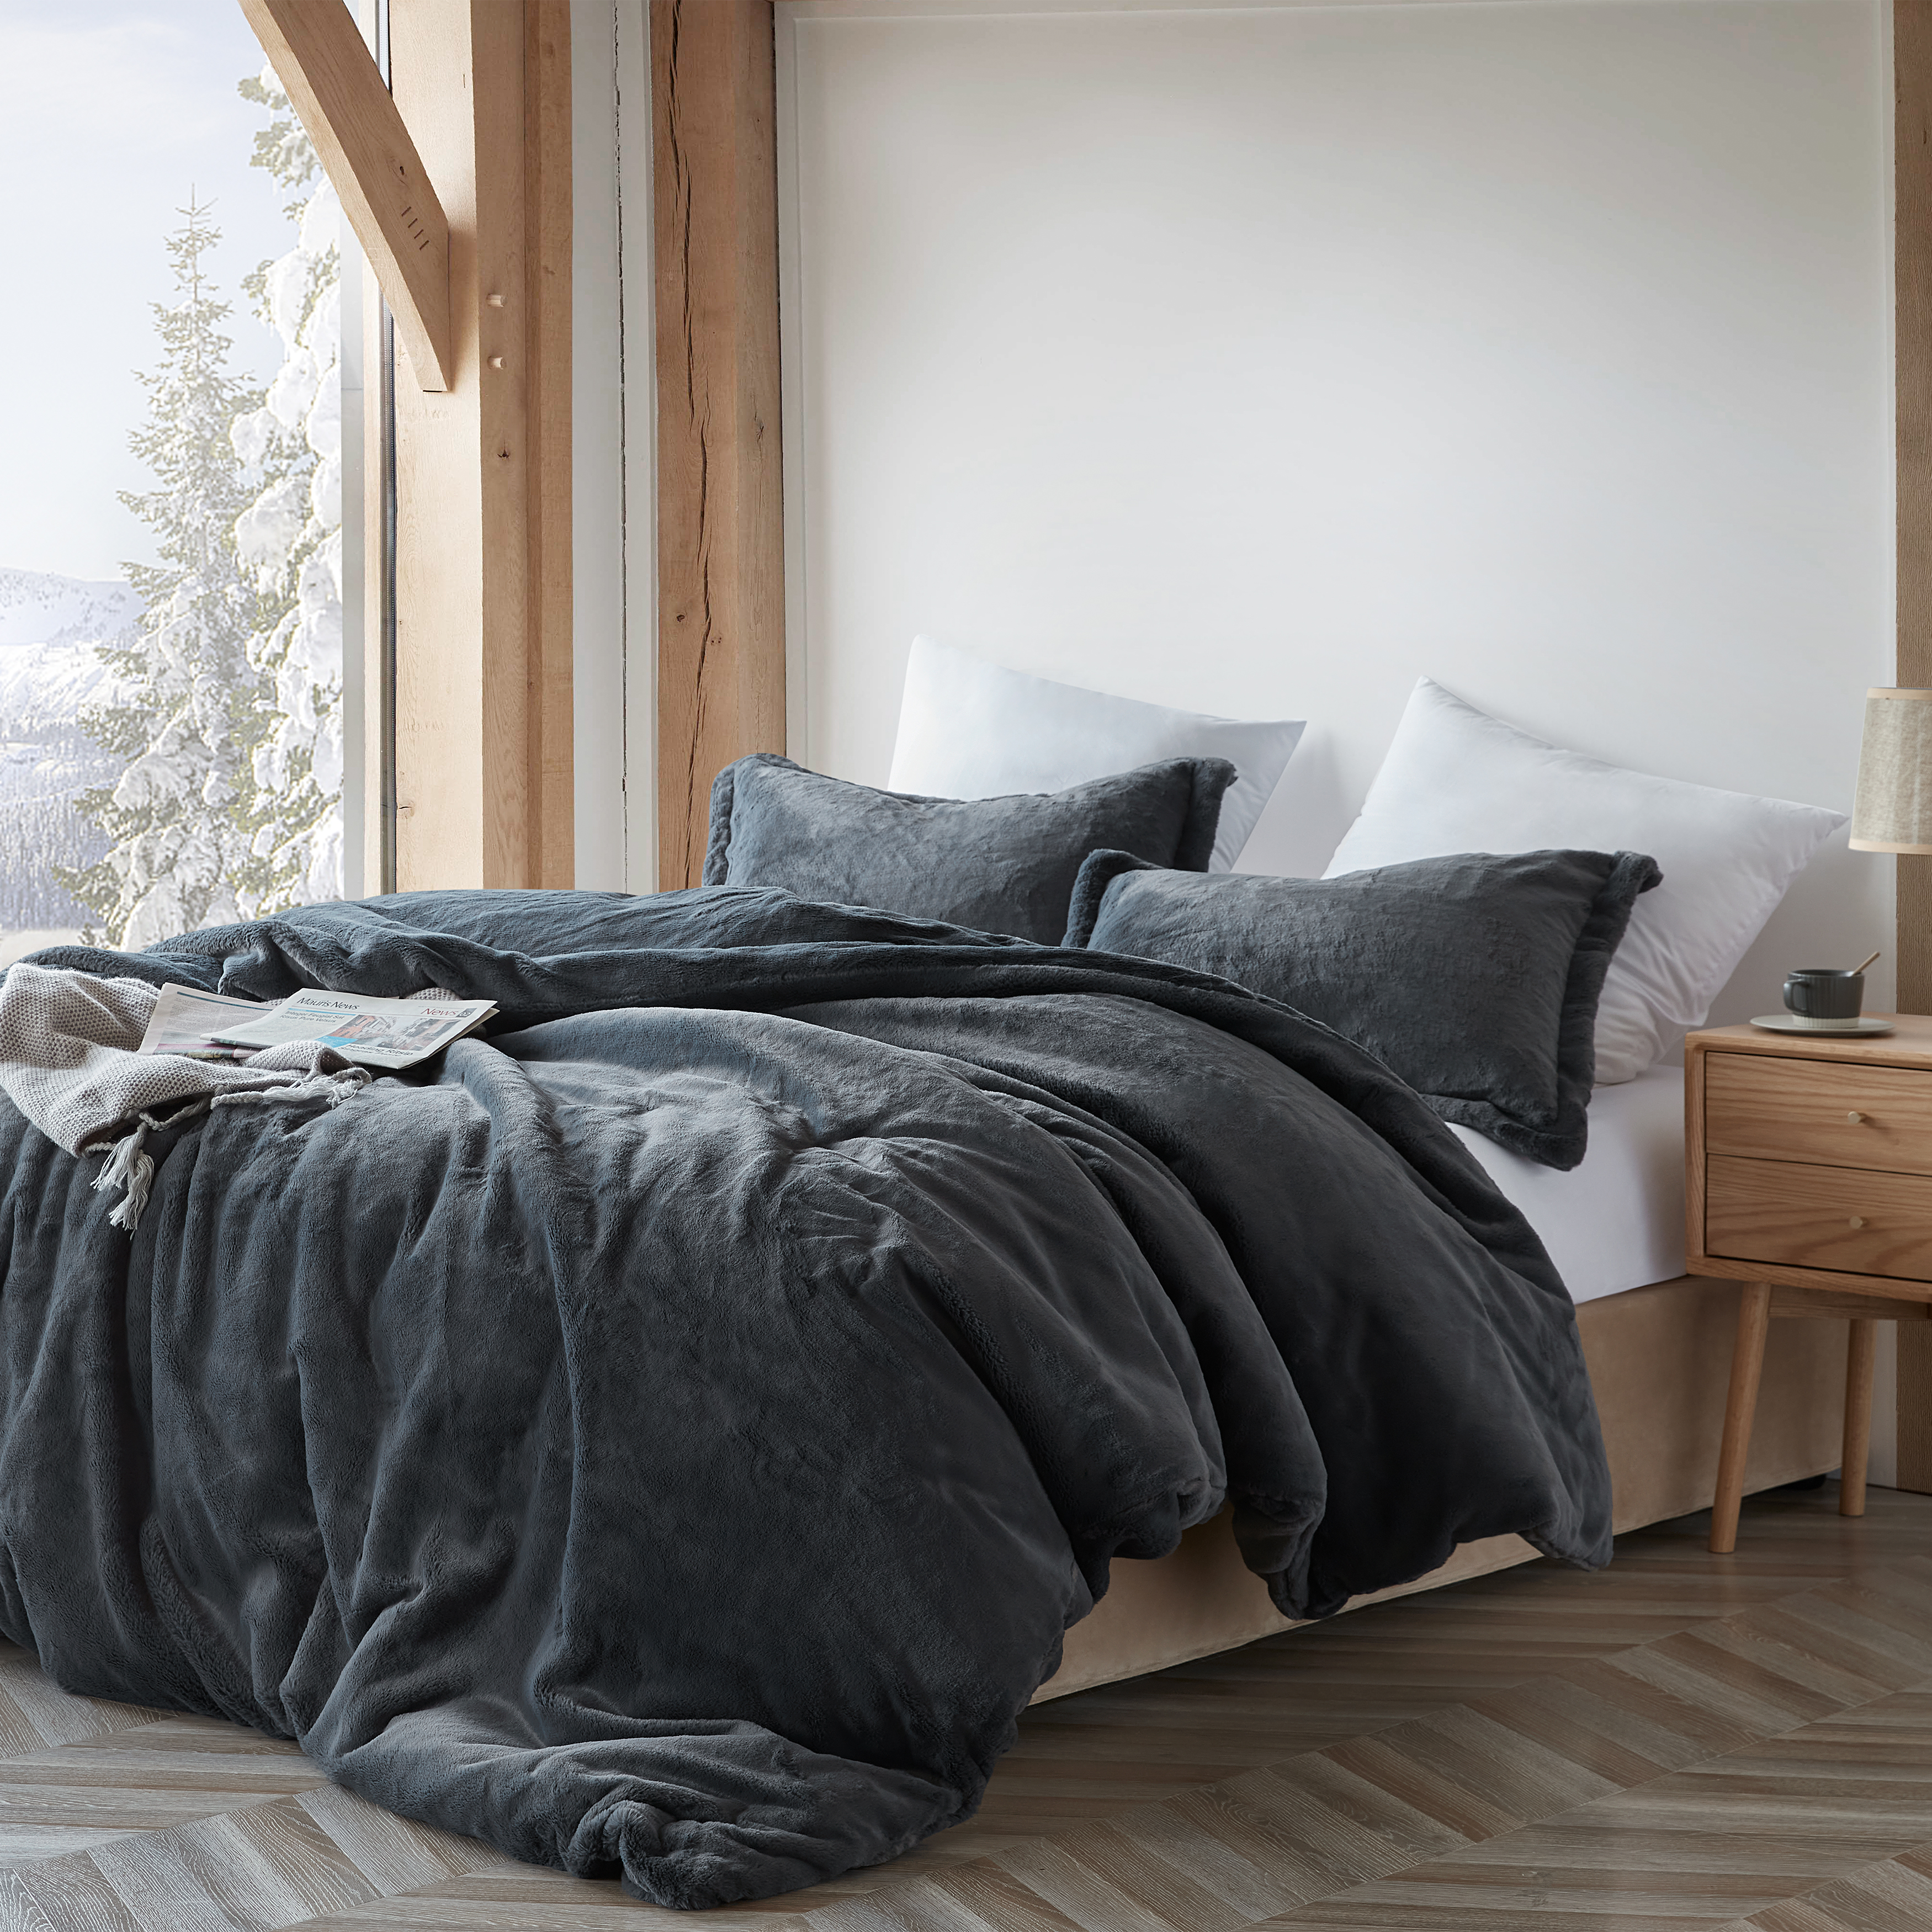 Chunky Bunny - Coma Inducer Oversized King Comforter - Faded Black